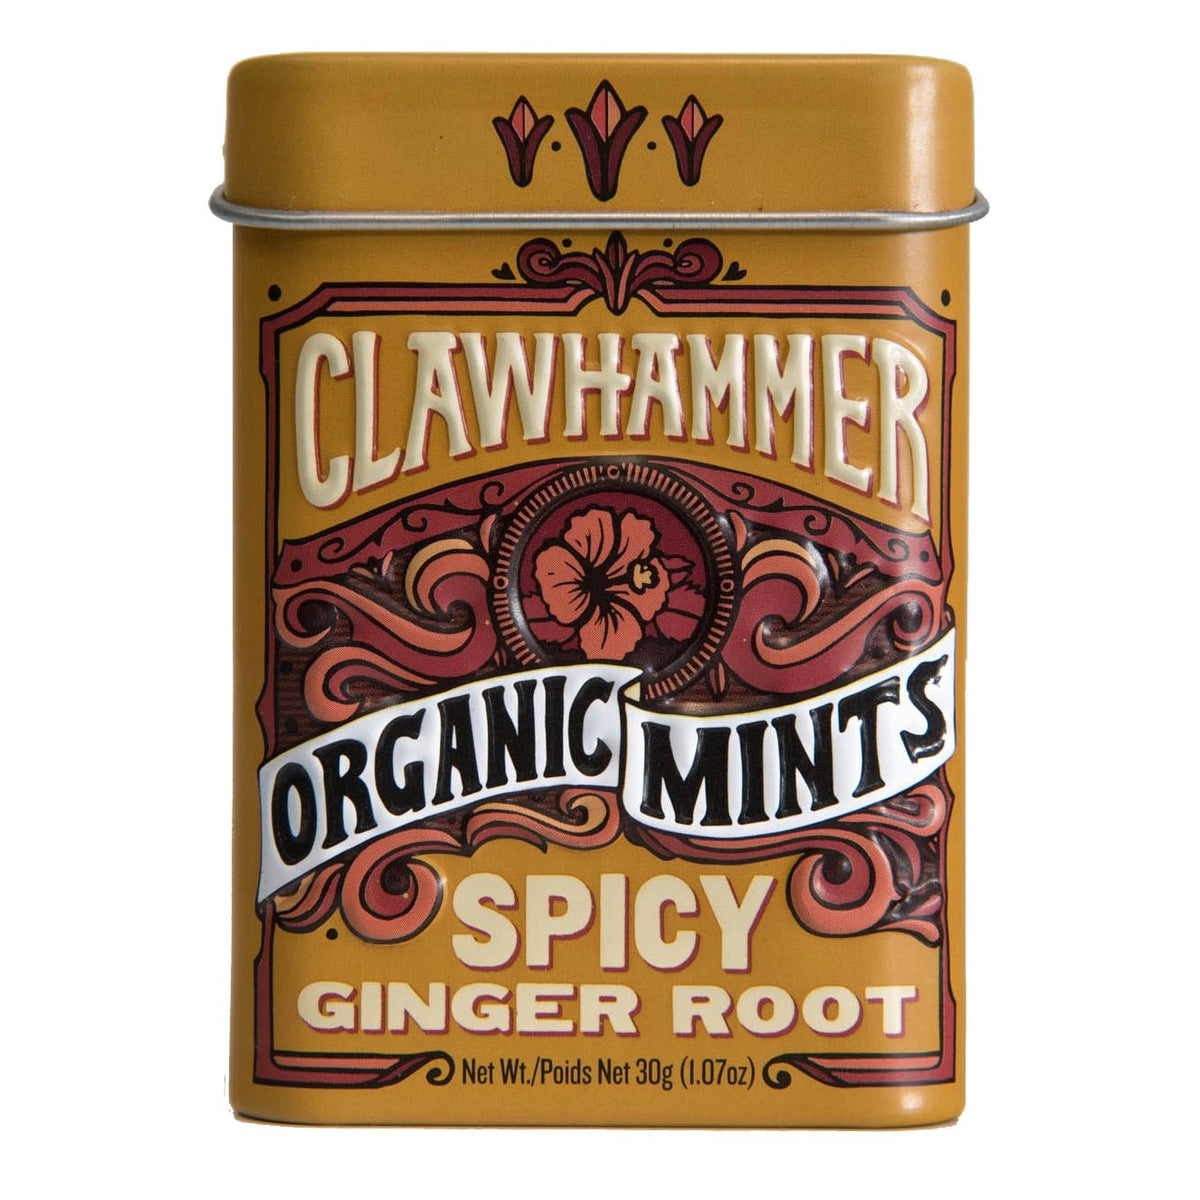 Spicy Ginger Root Organic Mints